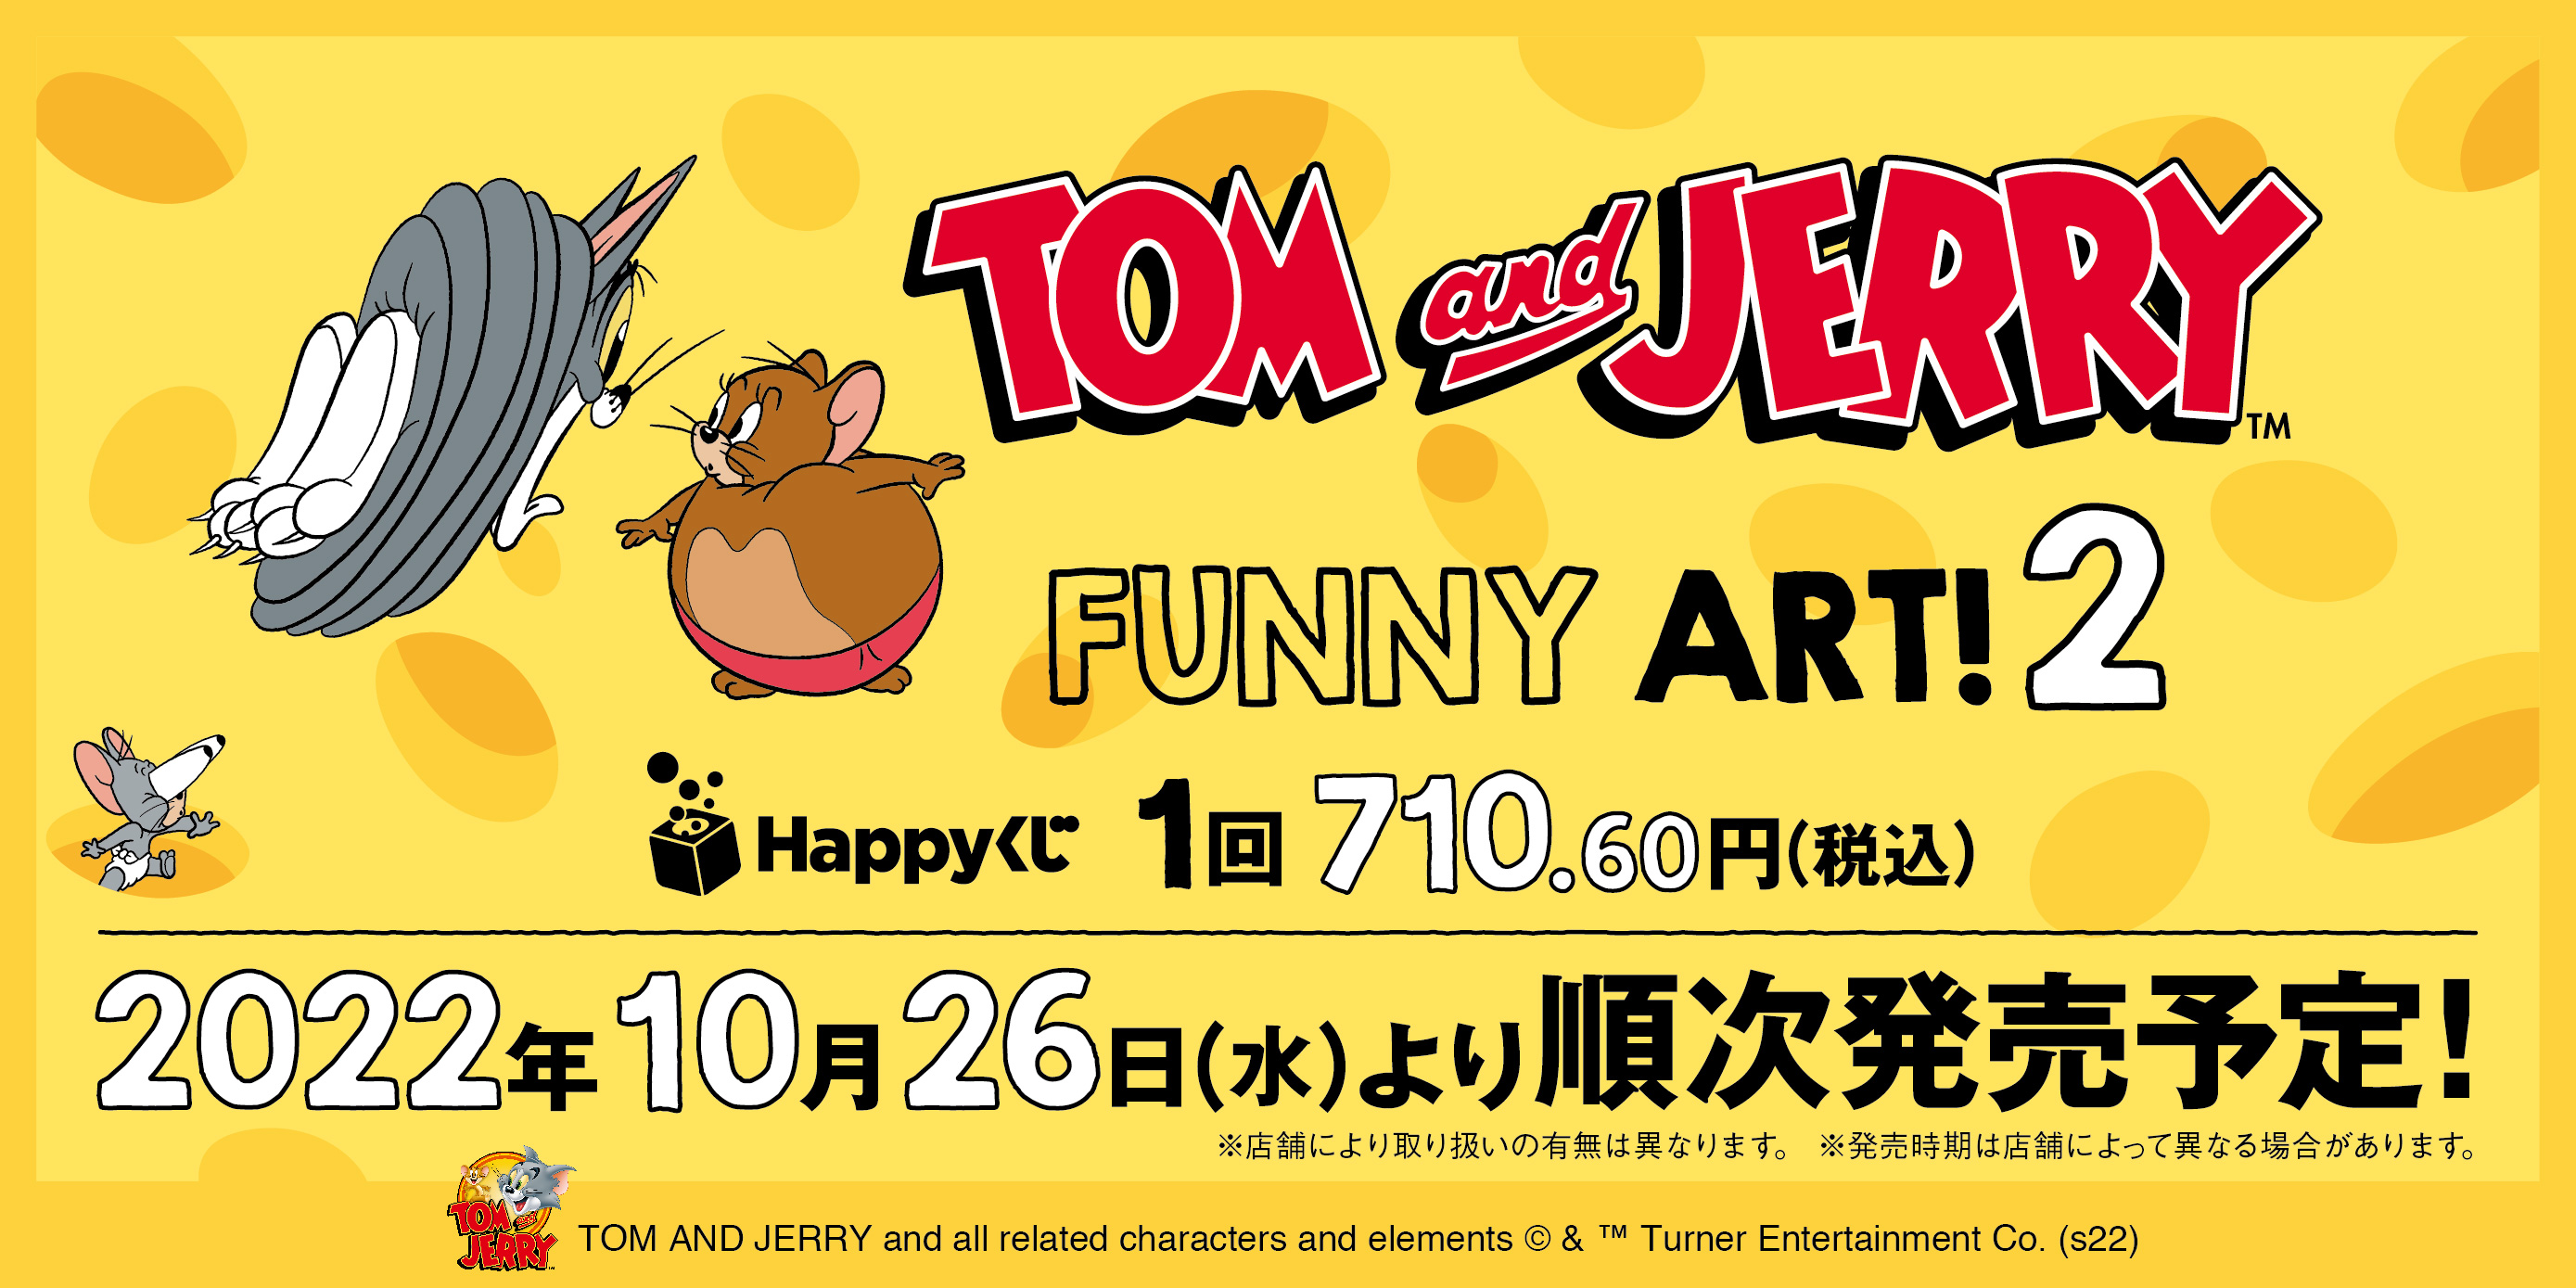 『TOM and JERRY FUNNY ART!』2